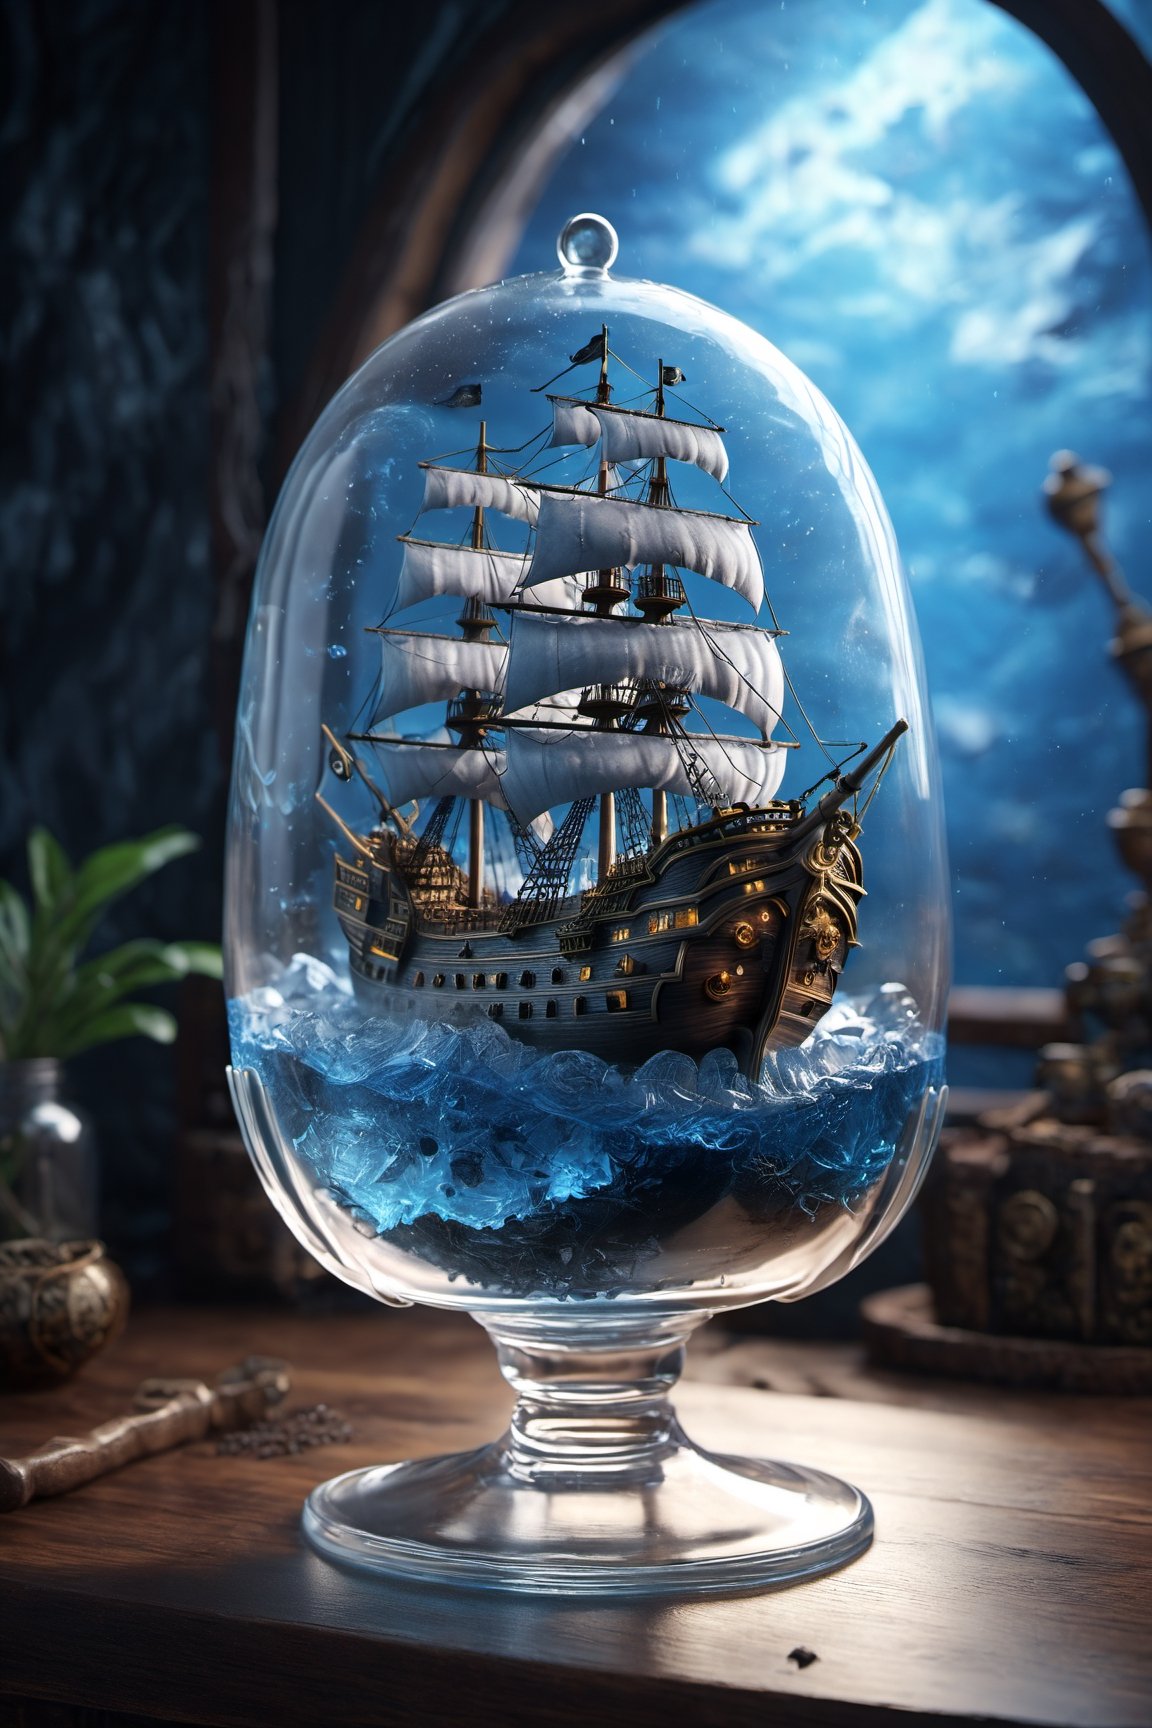 universal consciousness expanding, cosmic chaos energy a pirate ship inside a glass full of blue tea, high quality render, artstation, Unreal engine 5, octane render, 4k, dark gray background